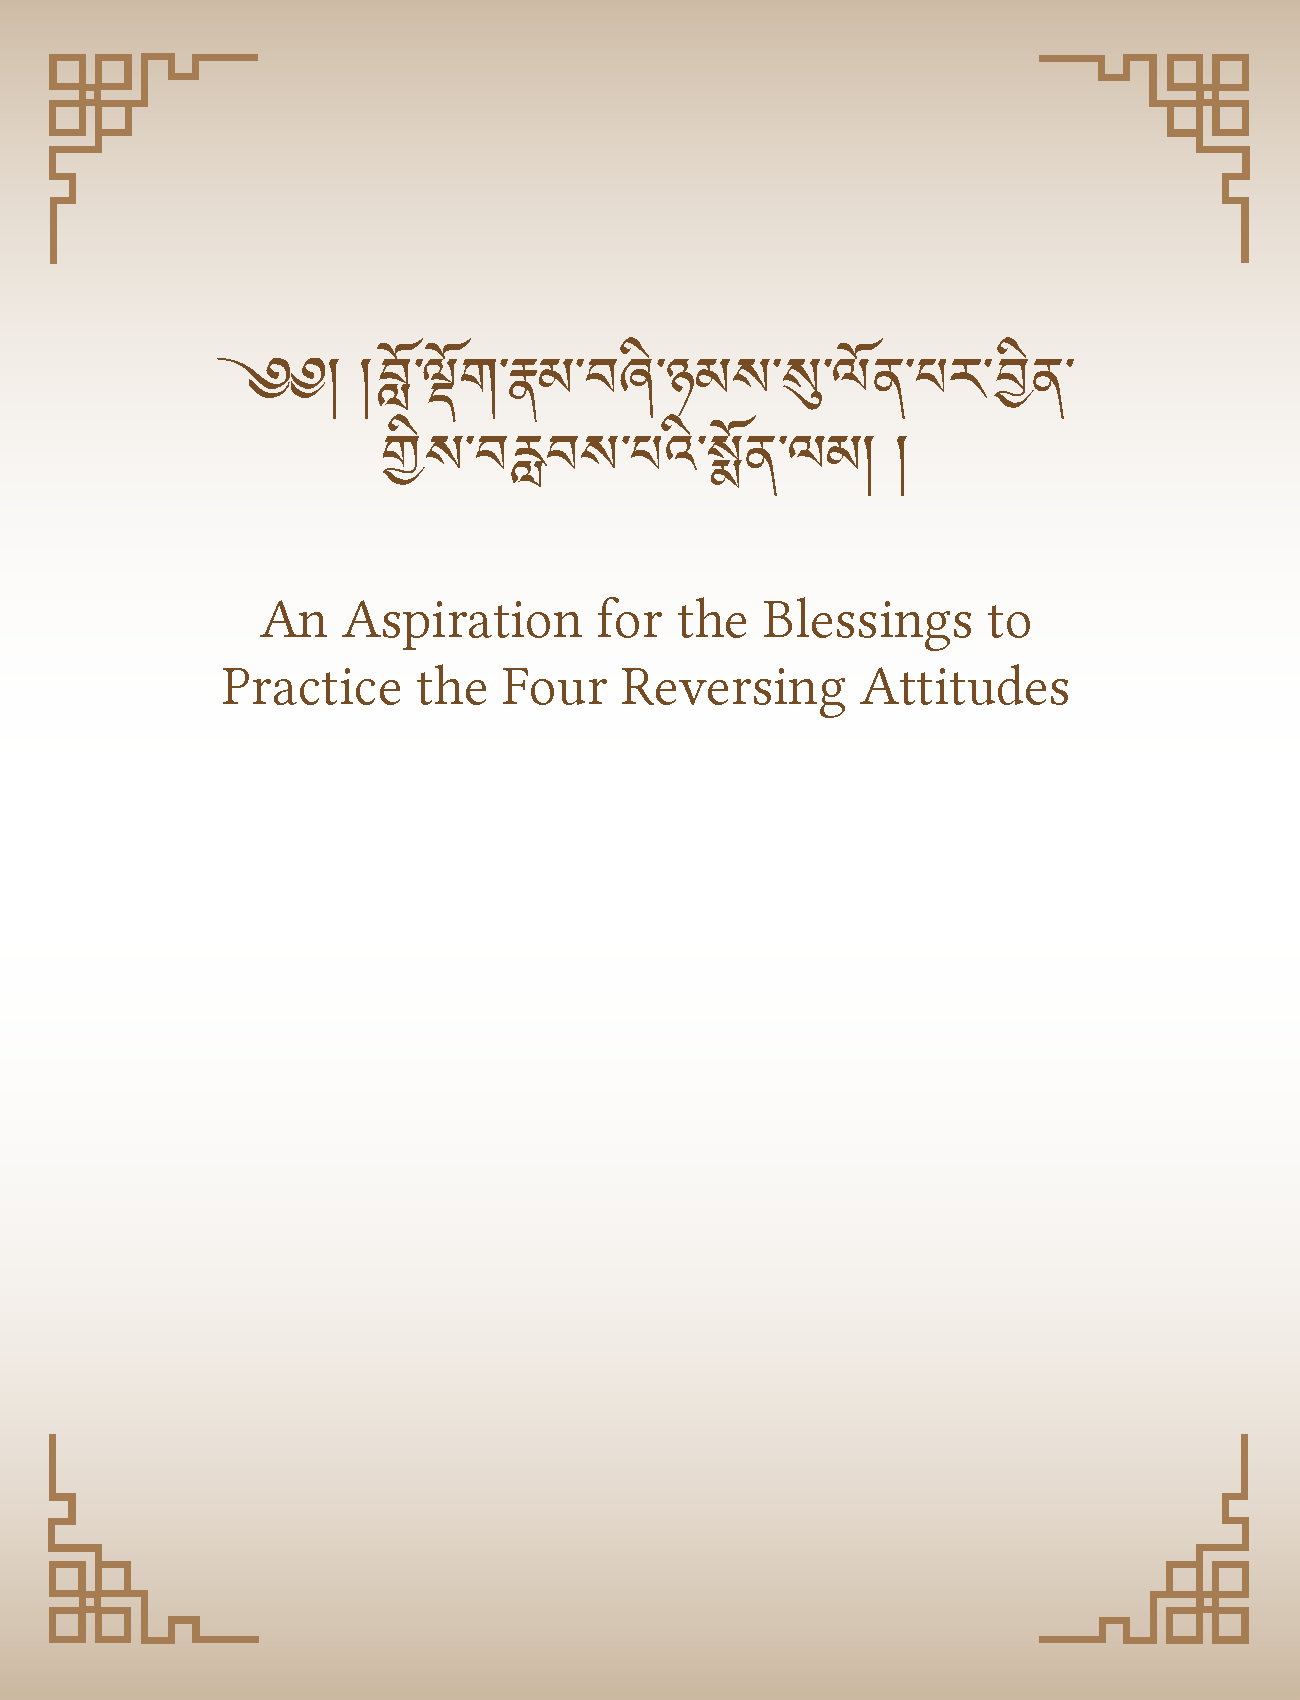 An Aspiration for the Blessings to Practice the Four Reversing Attitudes